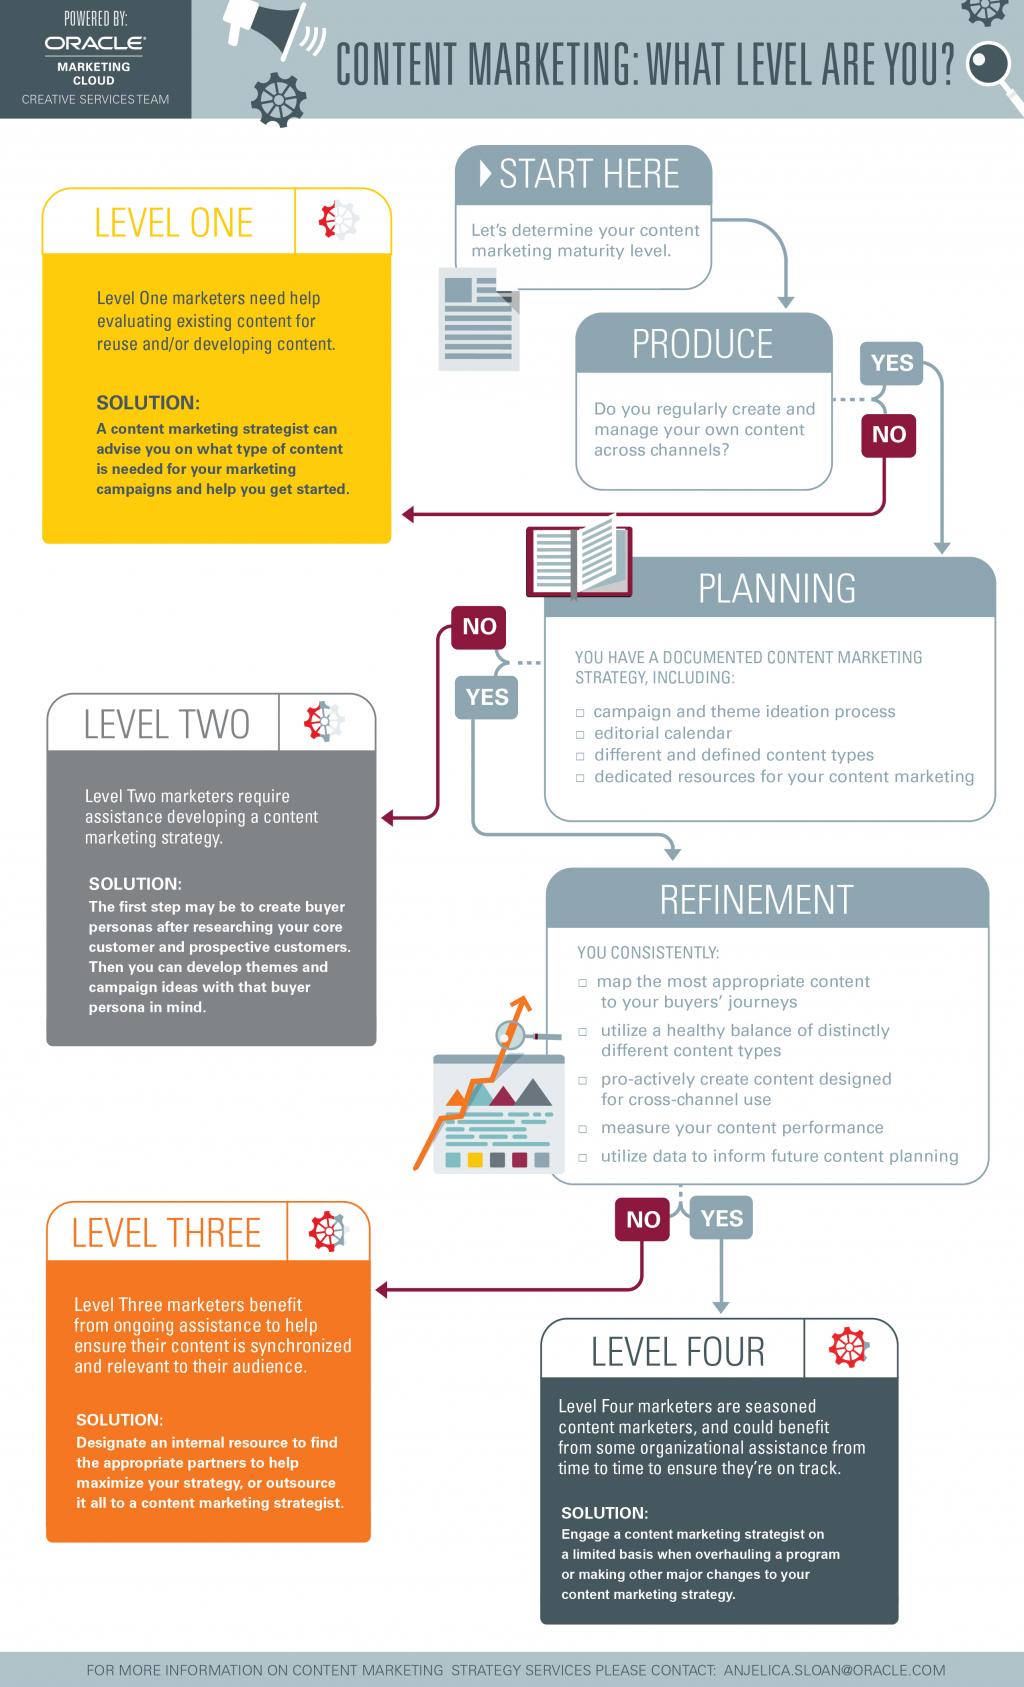 Assess Your #ContentMarketing Maturity Level - #Infographic